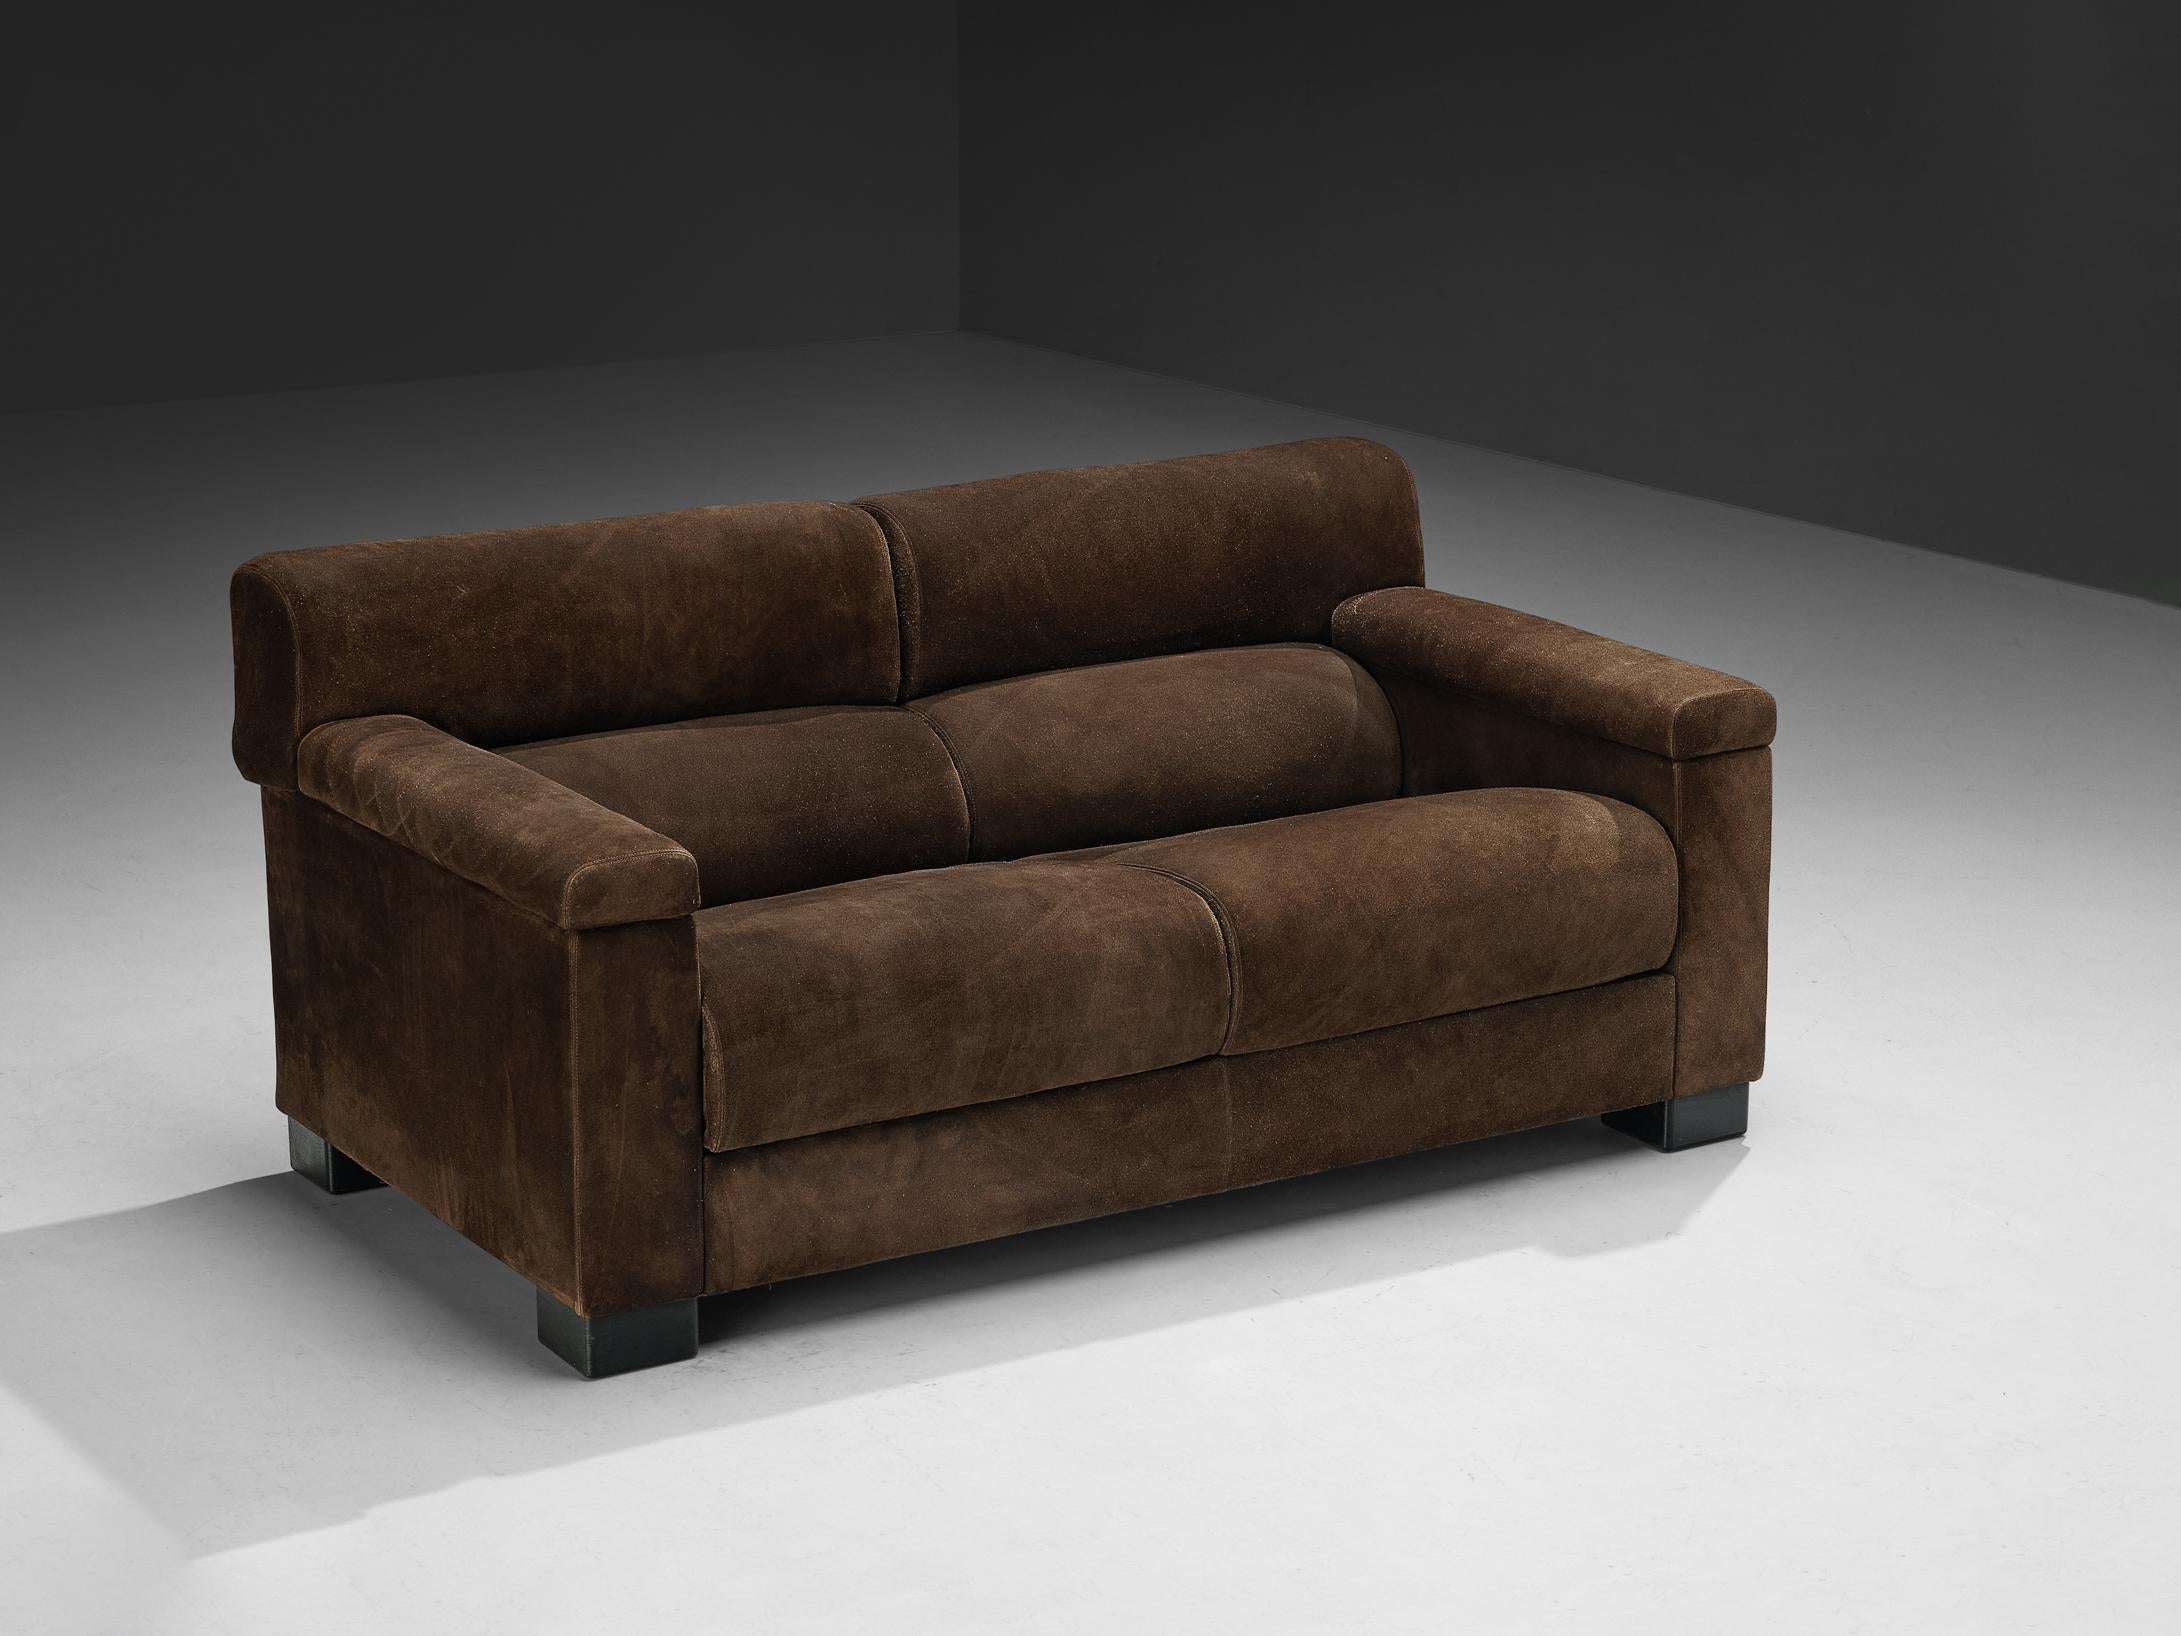 Tecno, sofa, suede, dark stained wood, Italy, 1960s. 

A substantial and sizable sofa produced by Italian furniture company Tecno. The bulky appearance is amplified by the upholstery, which features a dark brown suede upholstery. The sofas deep seat